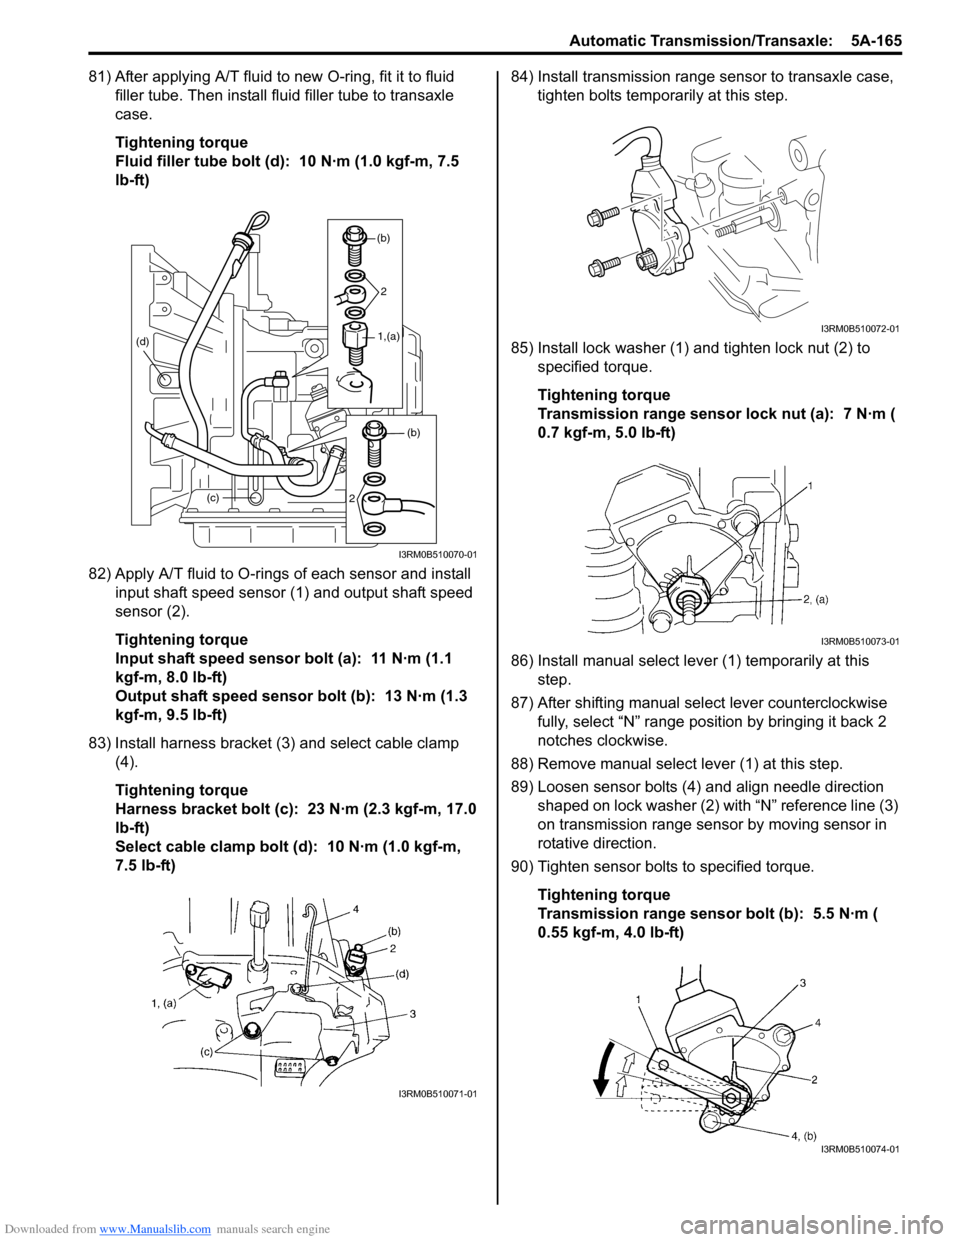 SUZUKI SWIFT 2007 2.G Service Workshop Manual Downloaded from www.Manualslib.com manuals search engine Automatic Transmission/Transaxle:  5A-165
81) After applying A/T fluid to new O-ring, fit it to fluid filler tube. Then install fl uid filler t